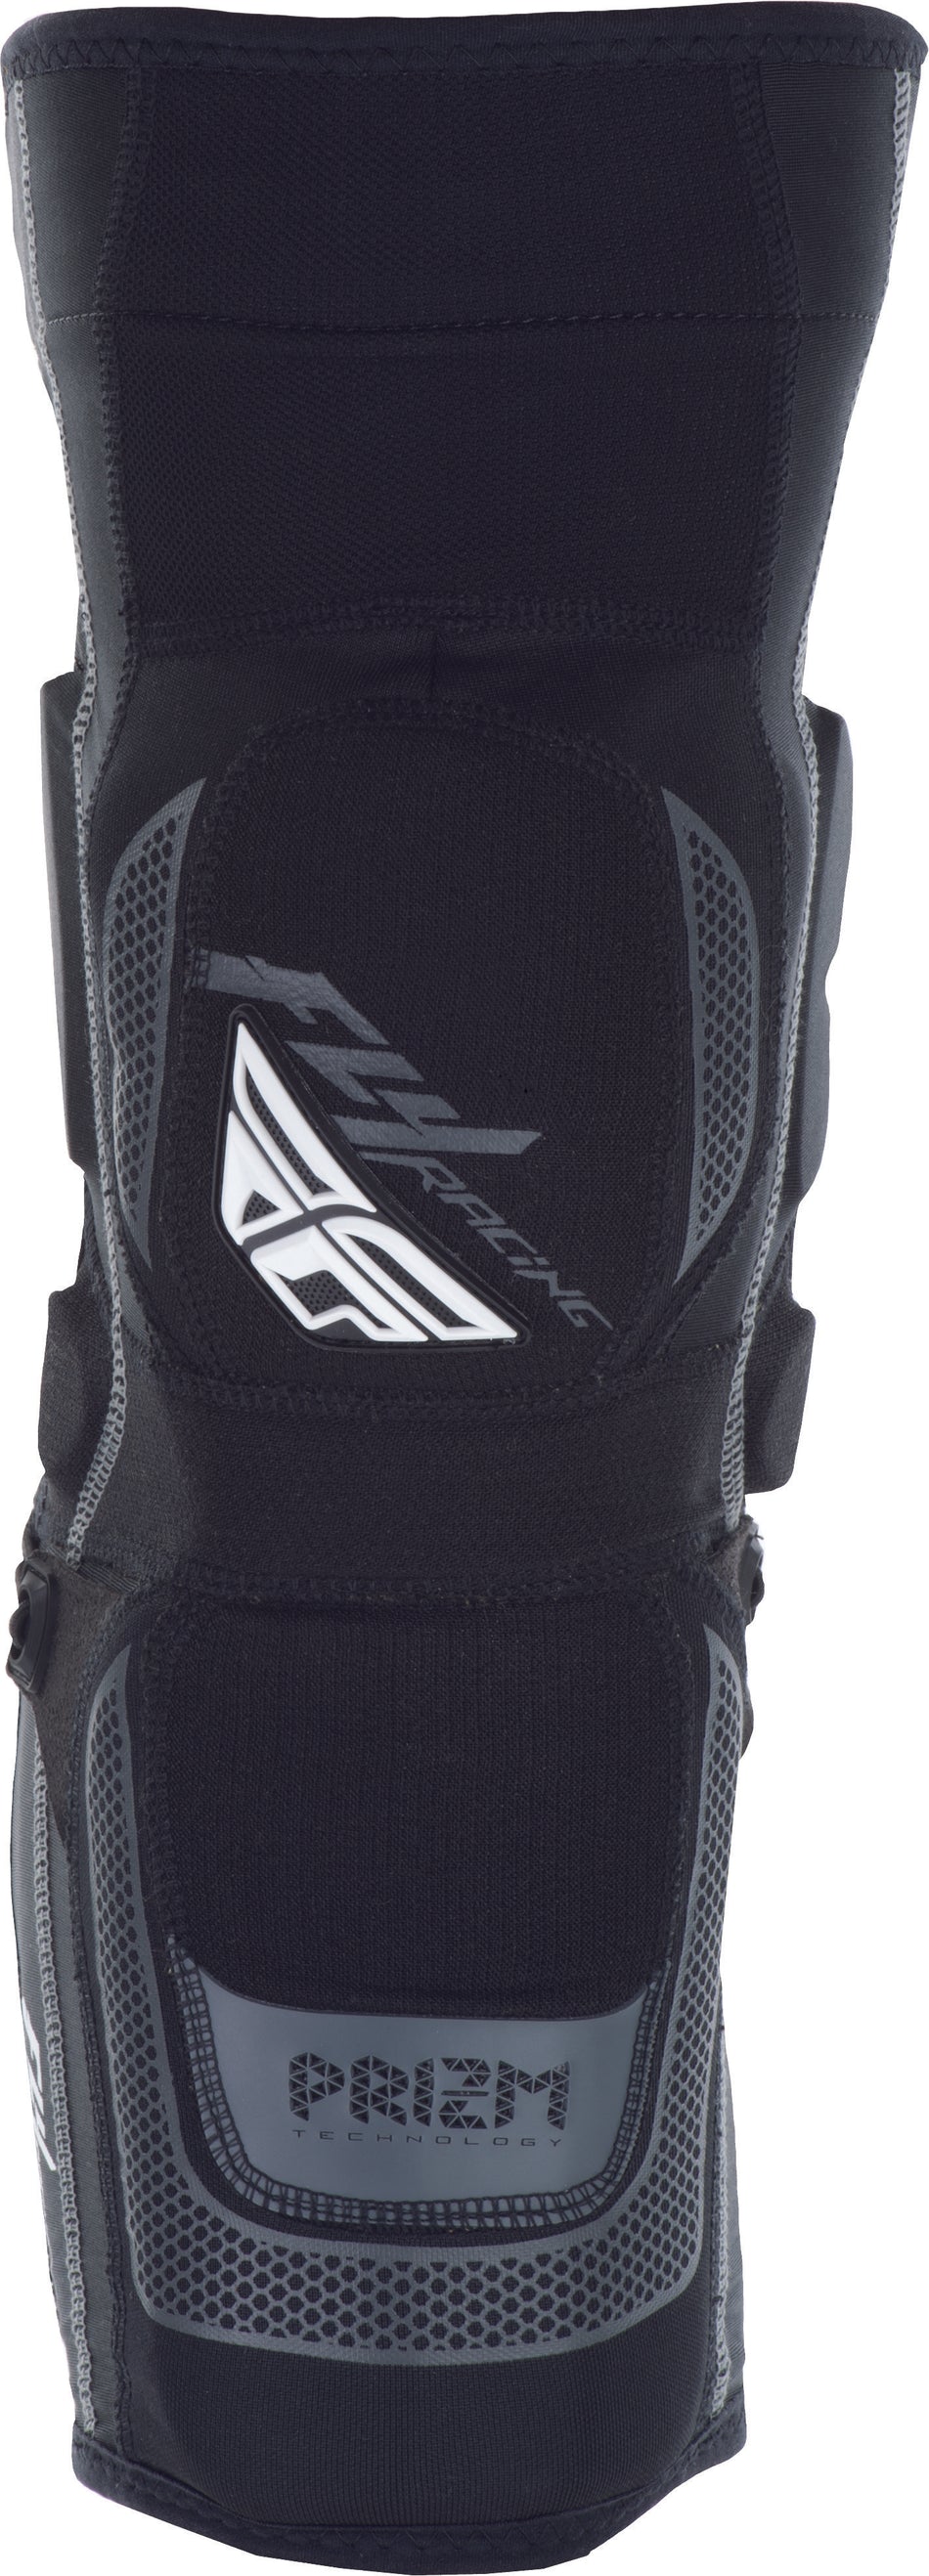 FLY RACING Prizm Knee Guard Md 28-3041